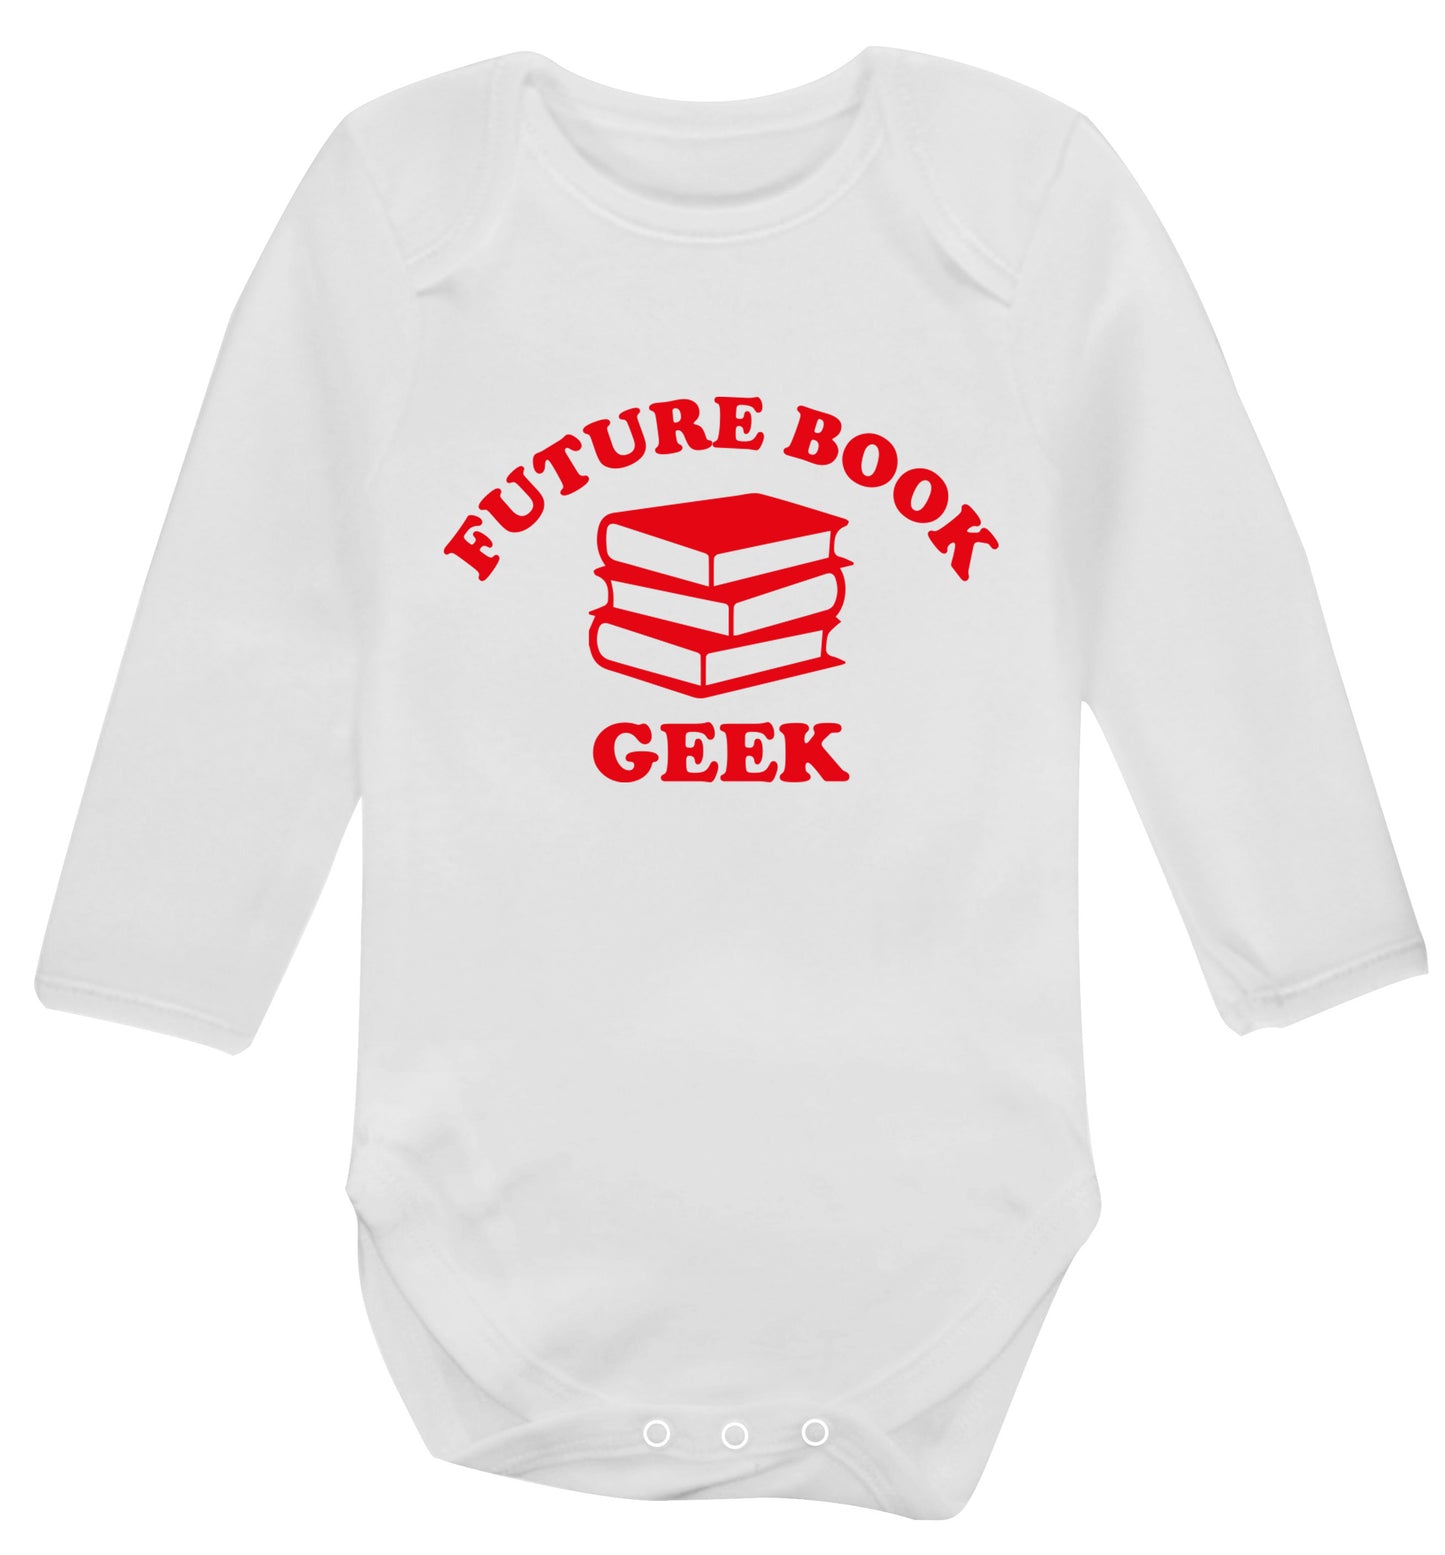 Future book geek Baby Vest long sleeved white 6-12 months